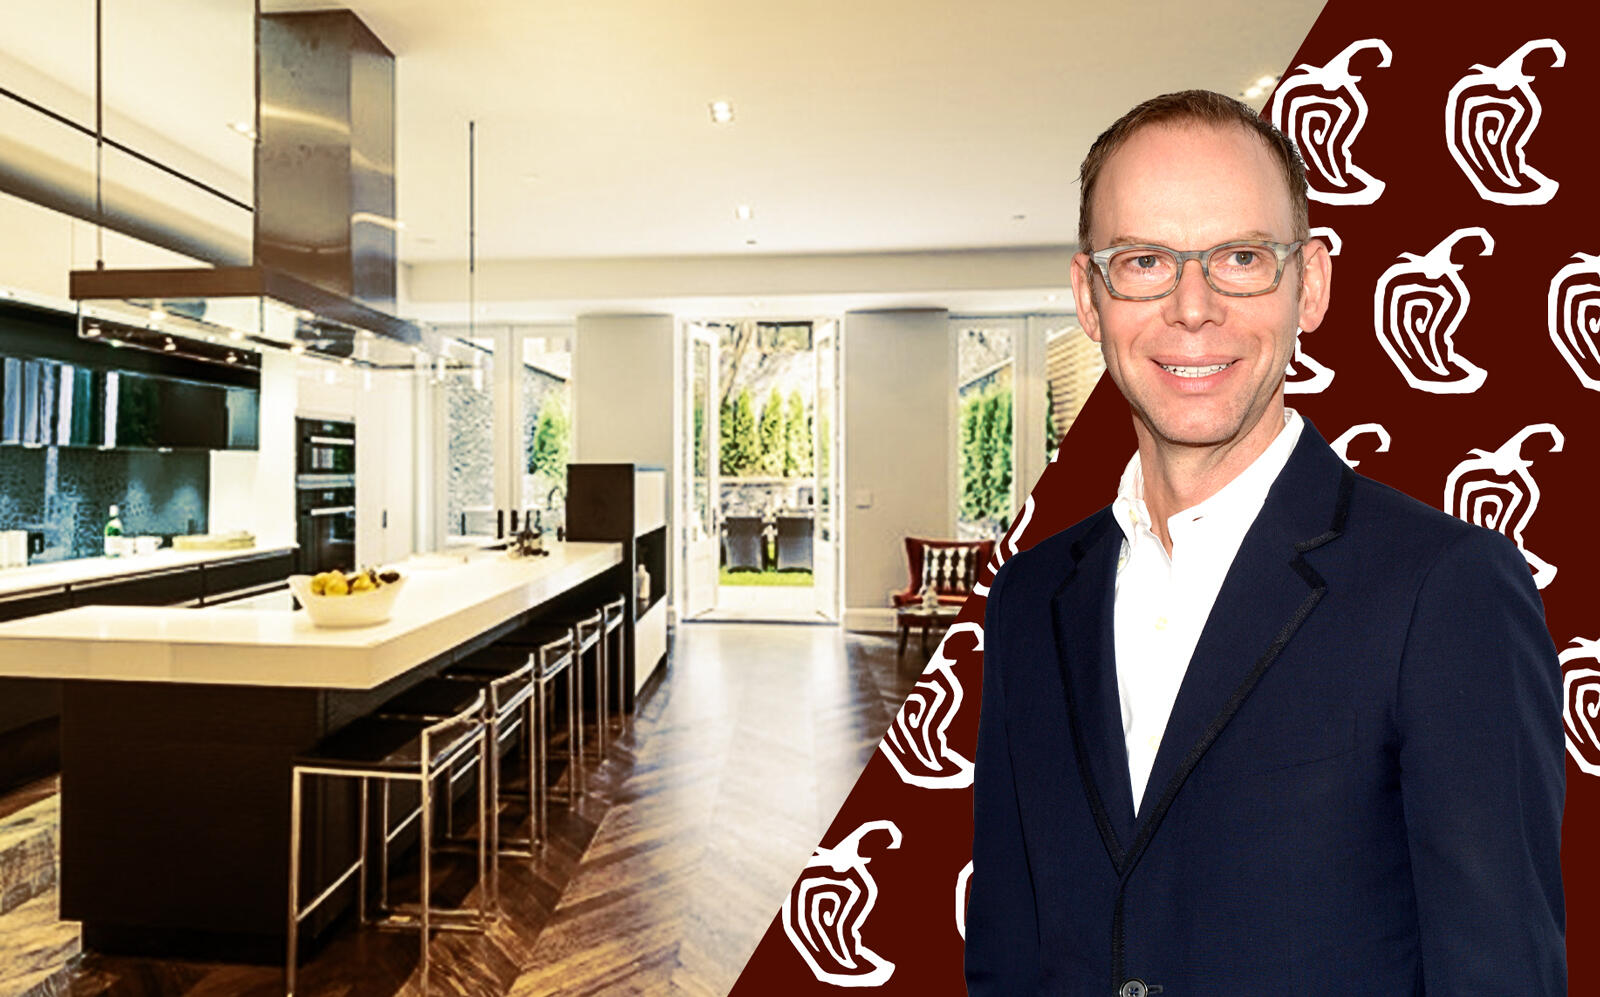 Chipotle founder Steve Ells with 27 East 11th Street (Getty, BHS)